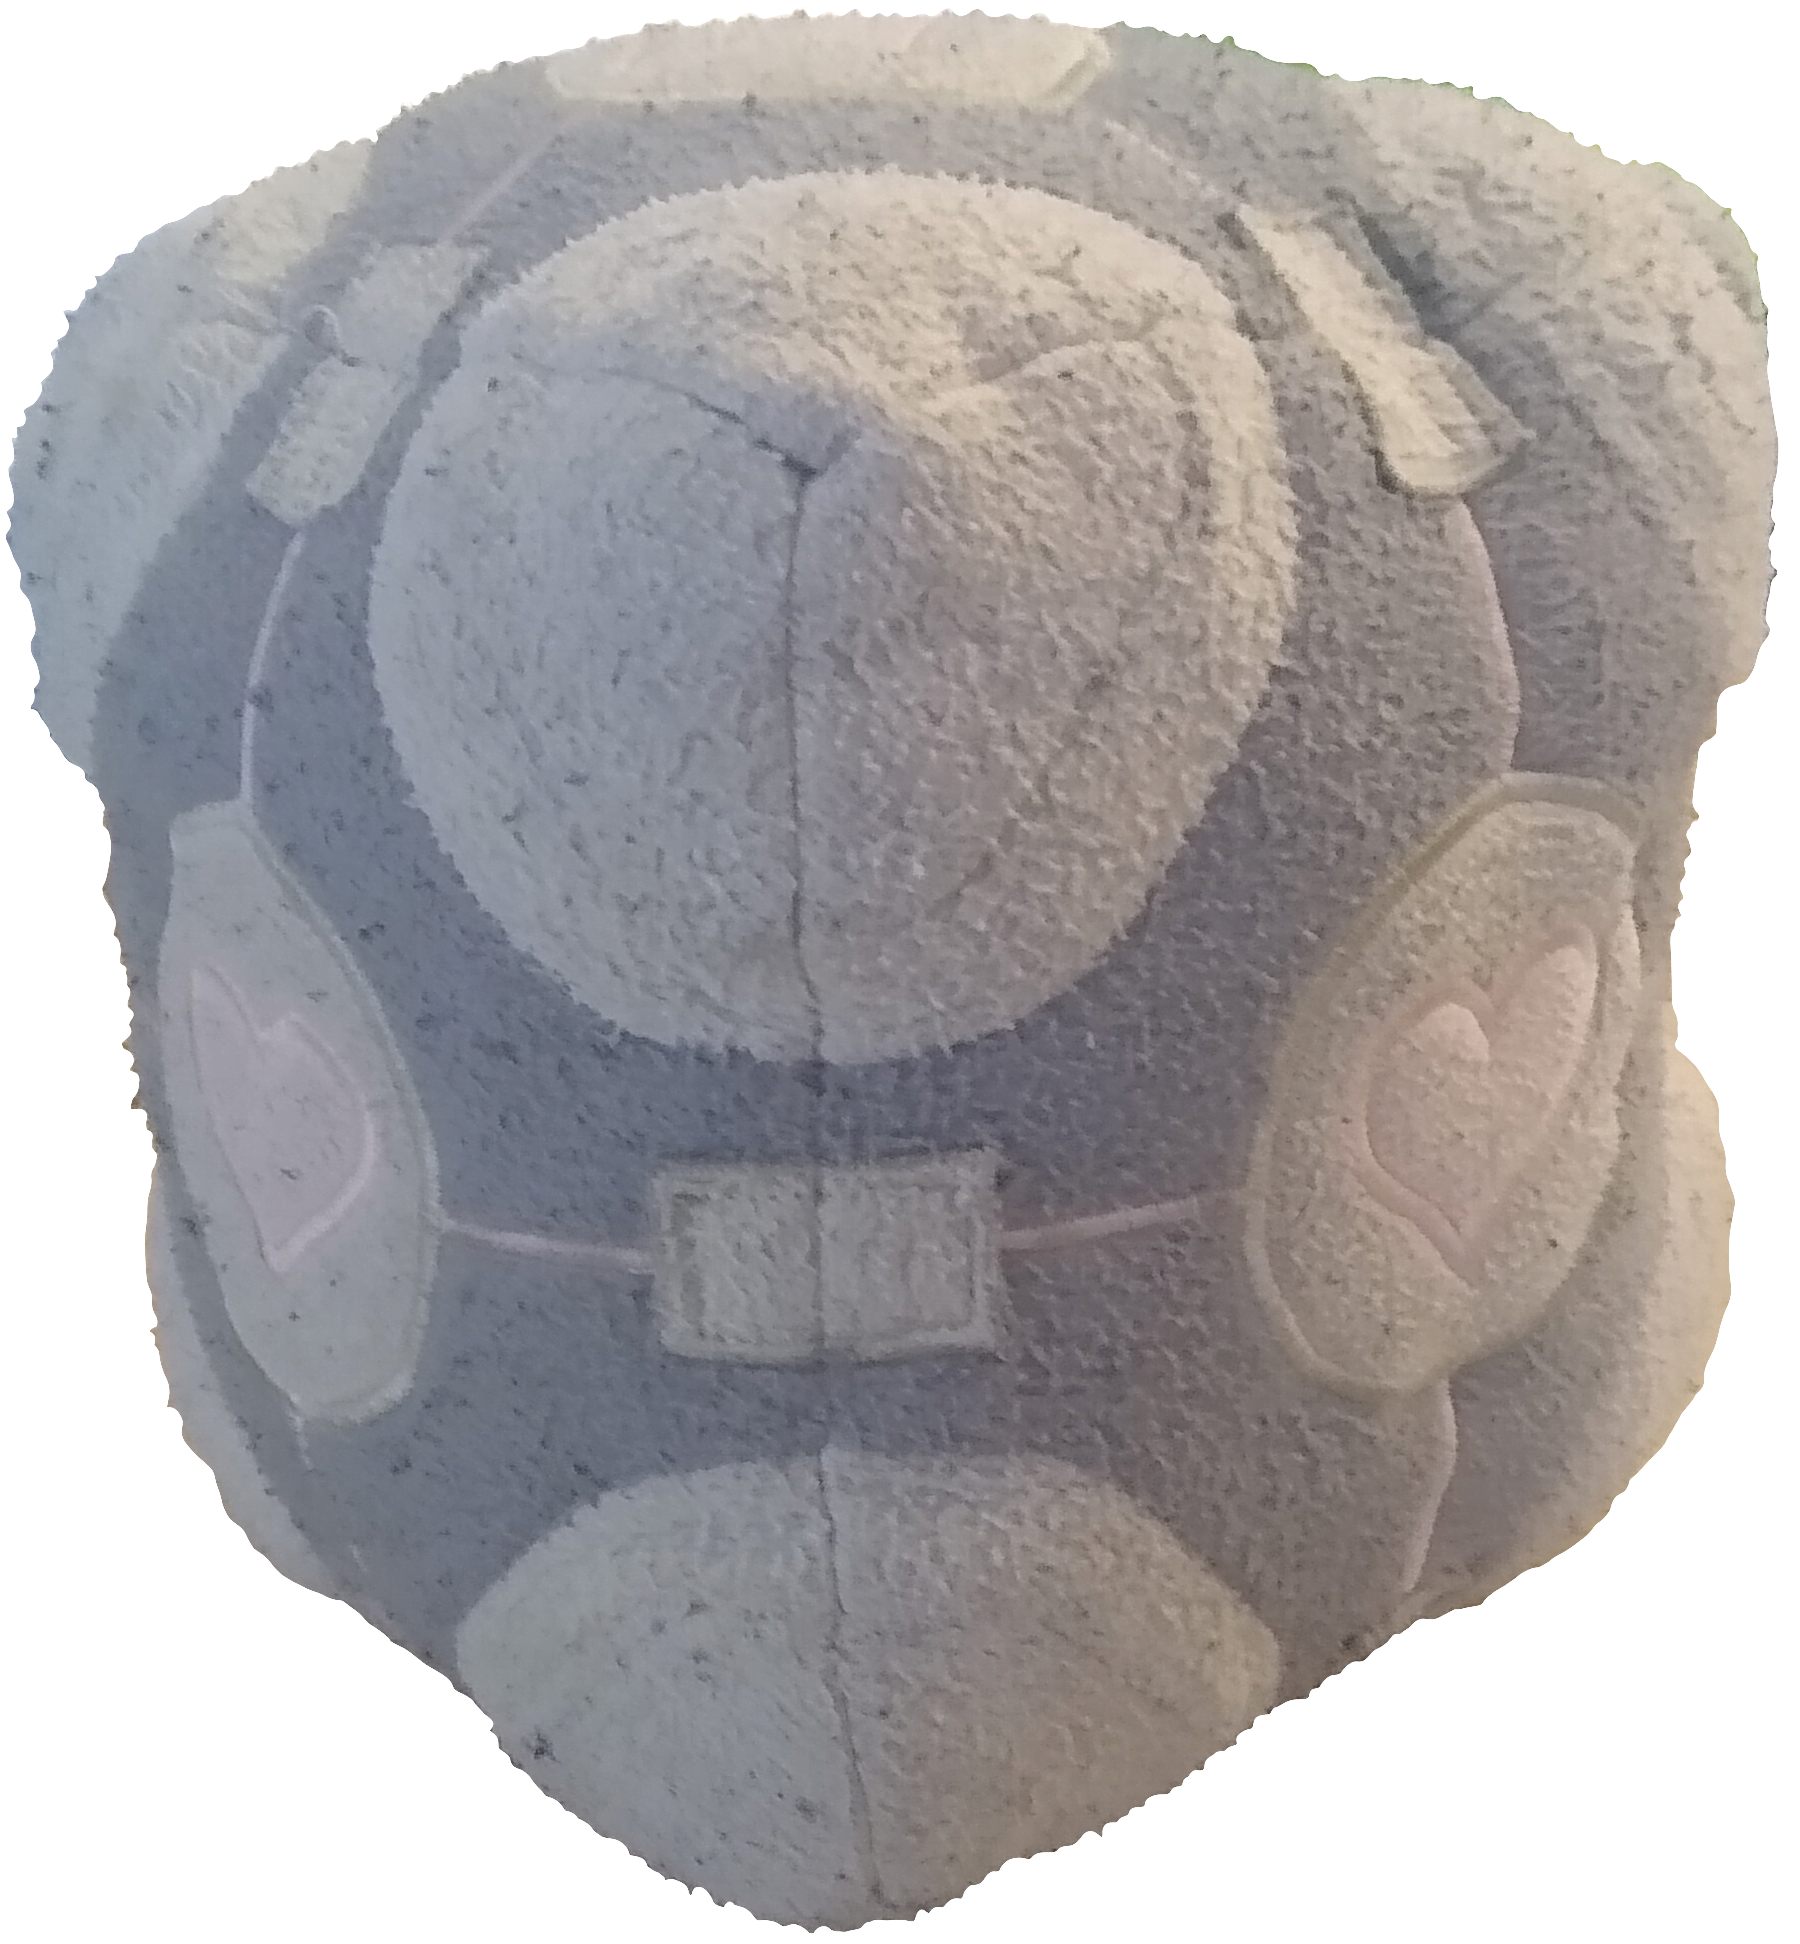 Plushie of a companion cube from Portal.